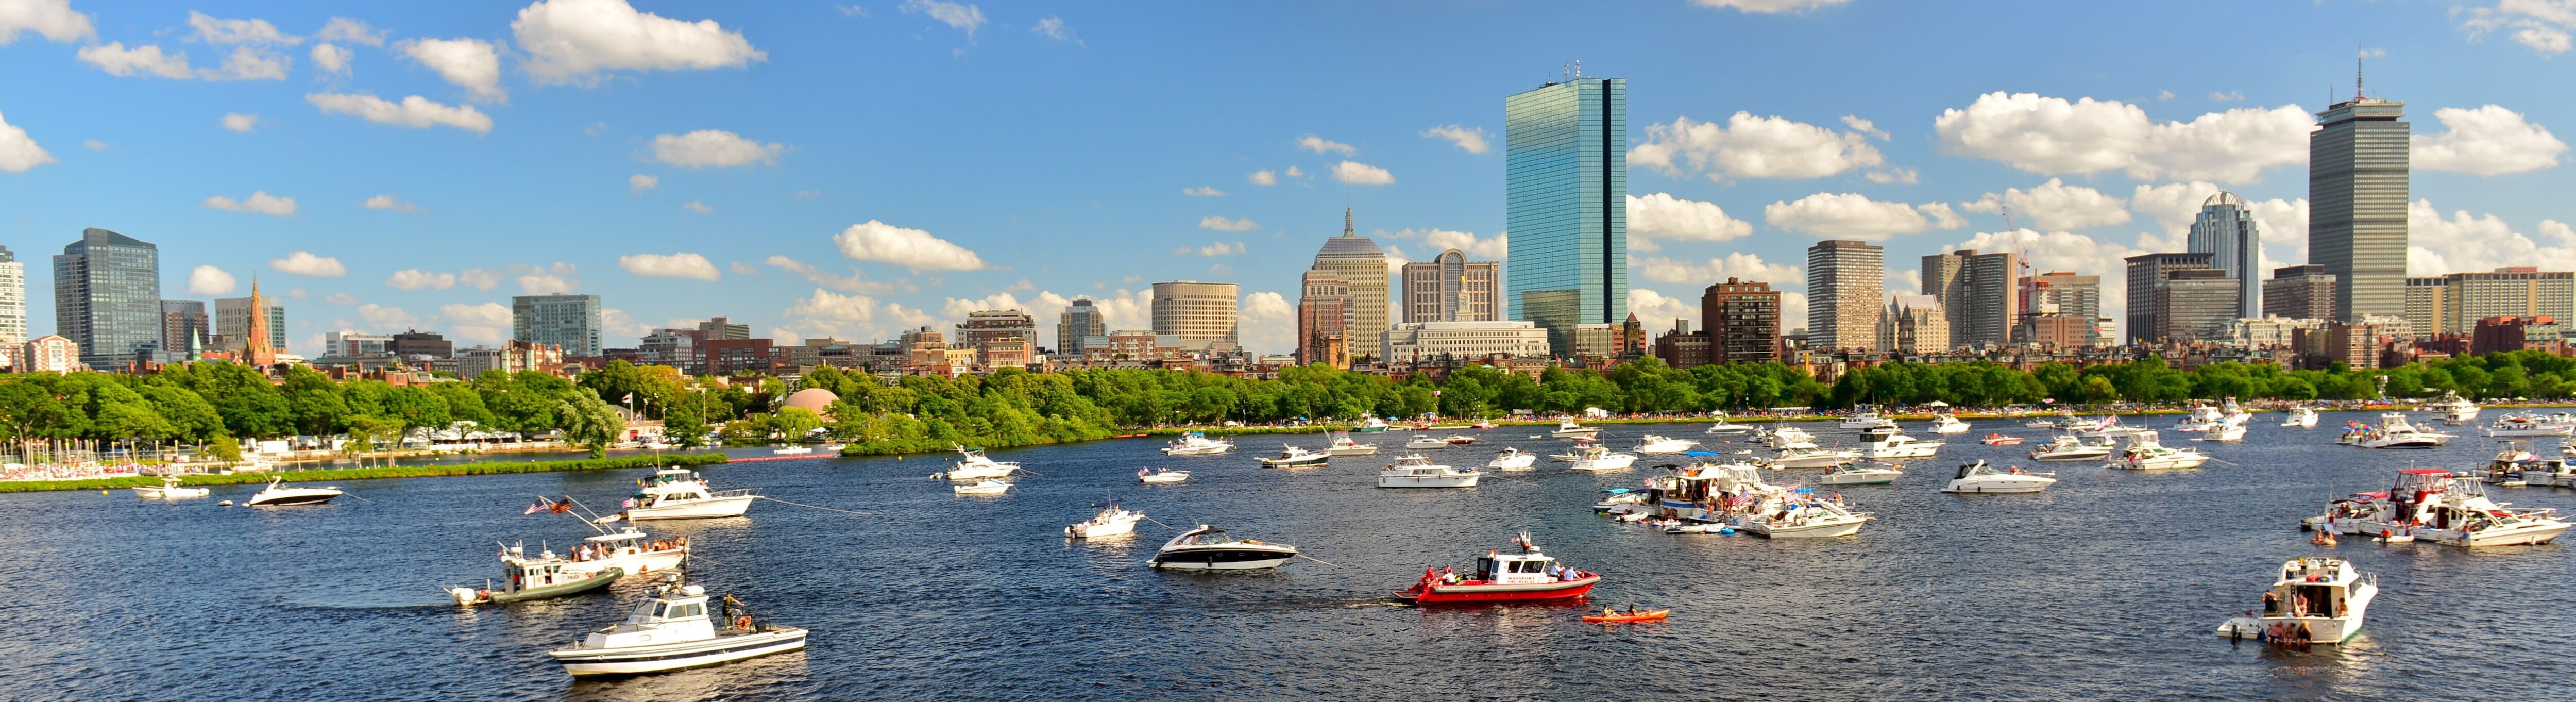 Sailboats on the Charles River in Boston